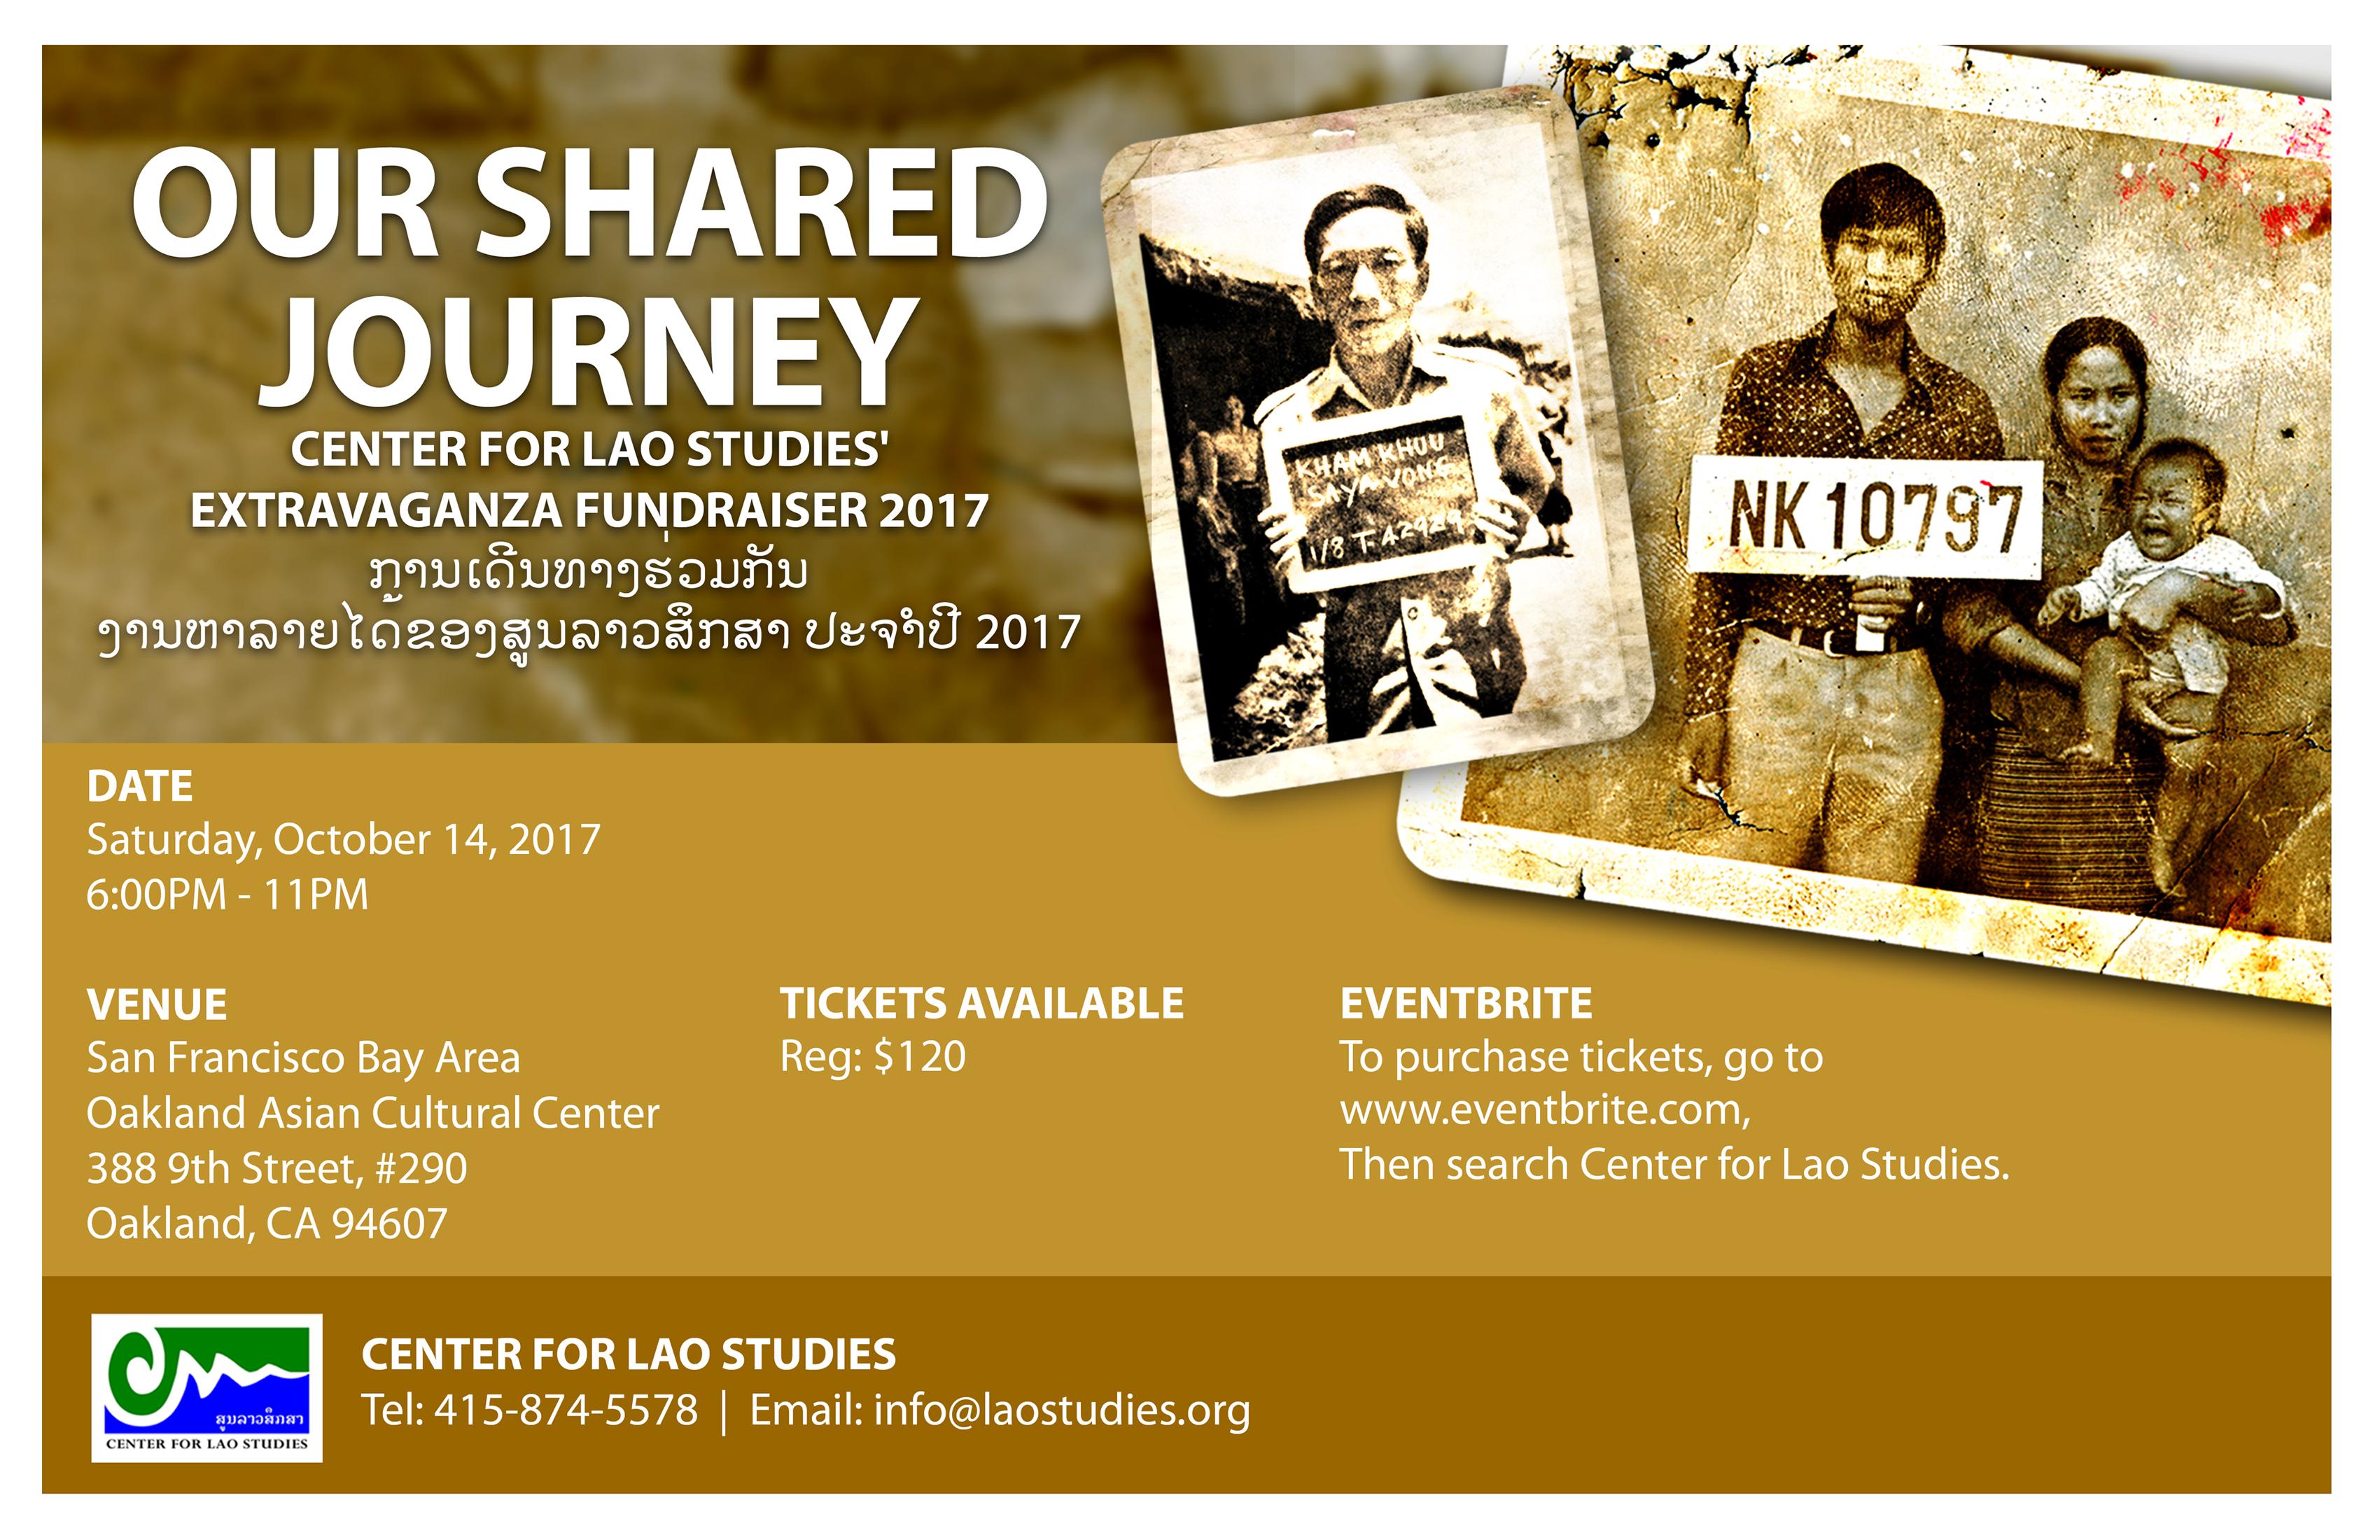 Our Shared Journey - Center for Lao Studies' Extravaganza Fundraiser 2017